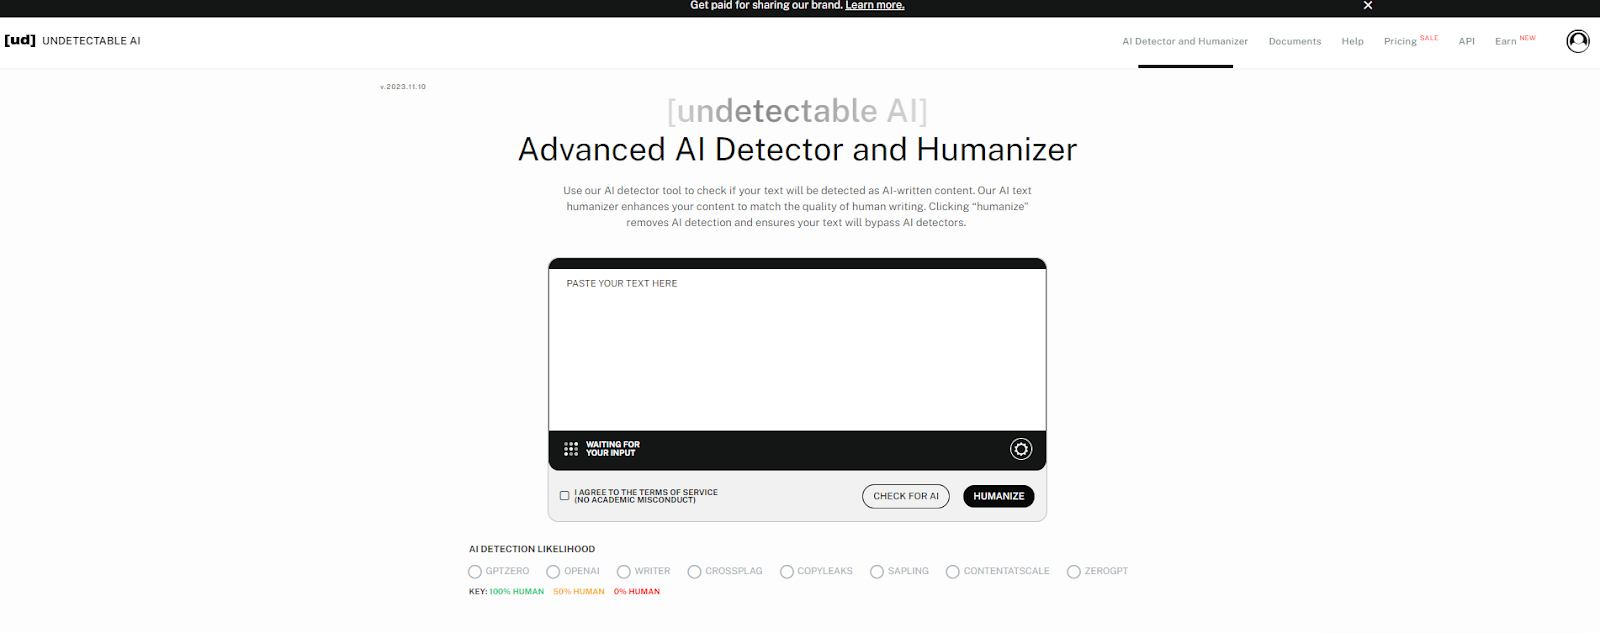 The homepage for undetectable.ai's AI checker.